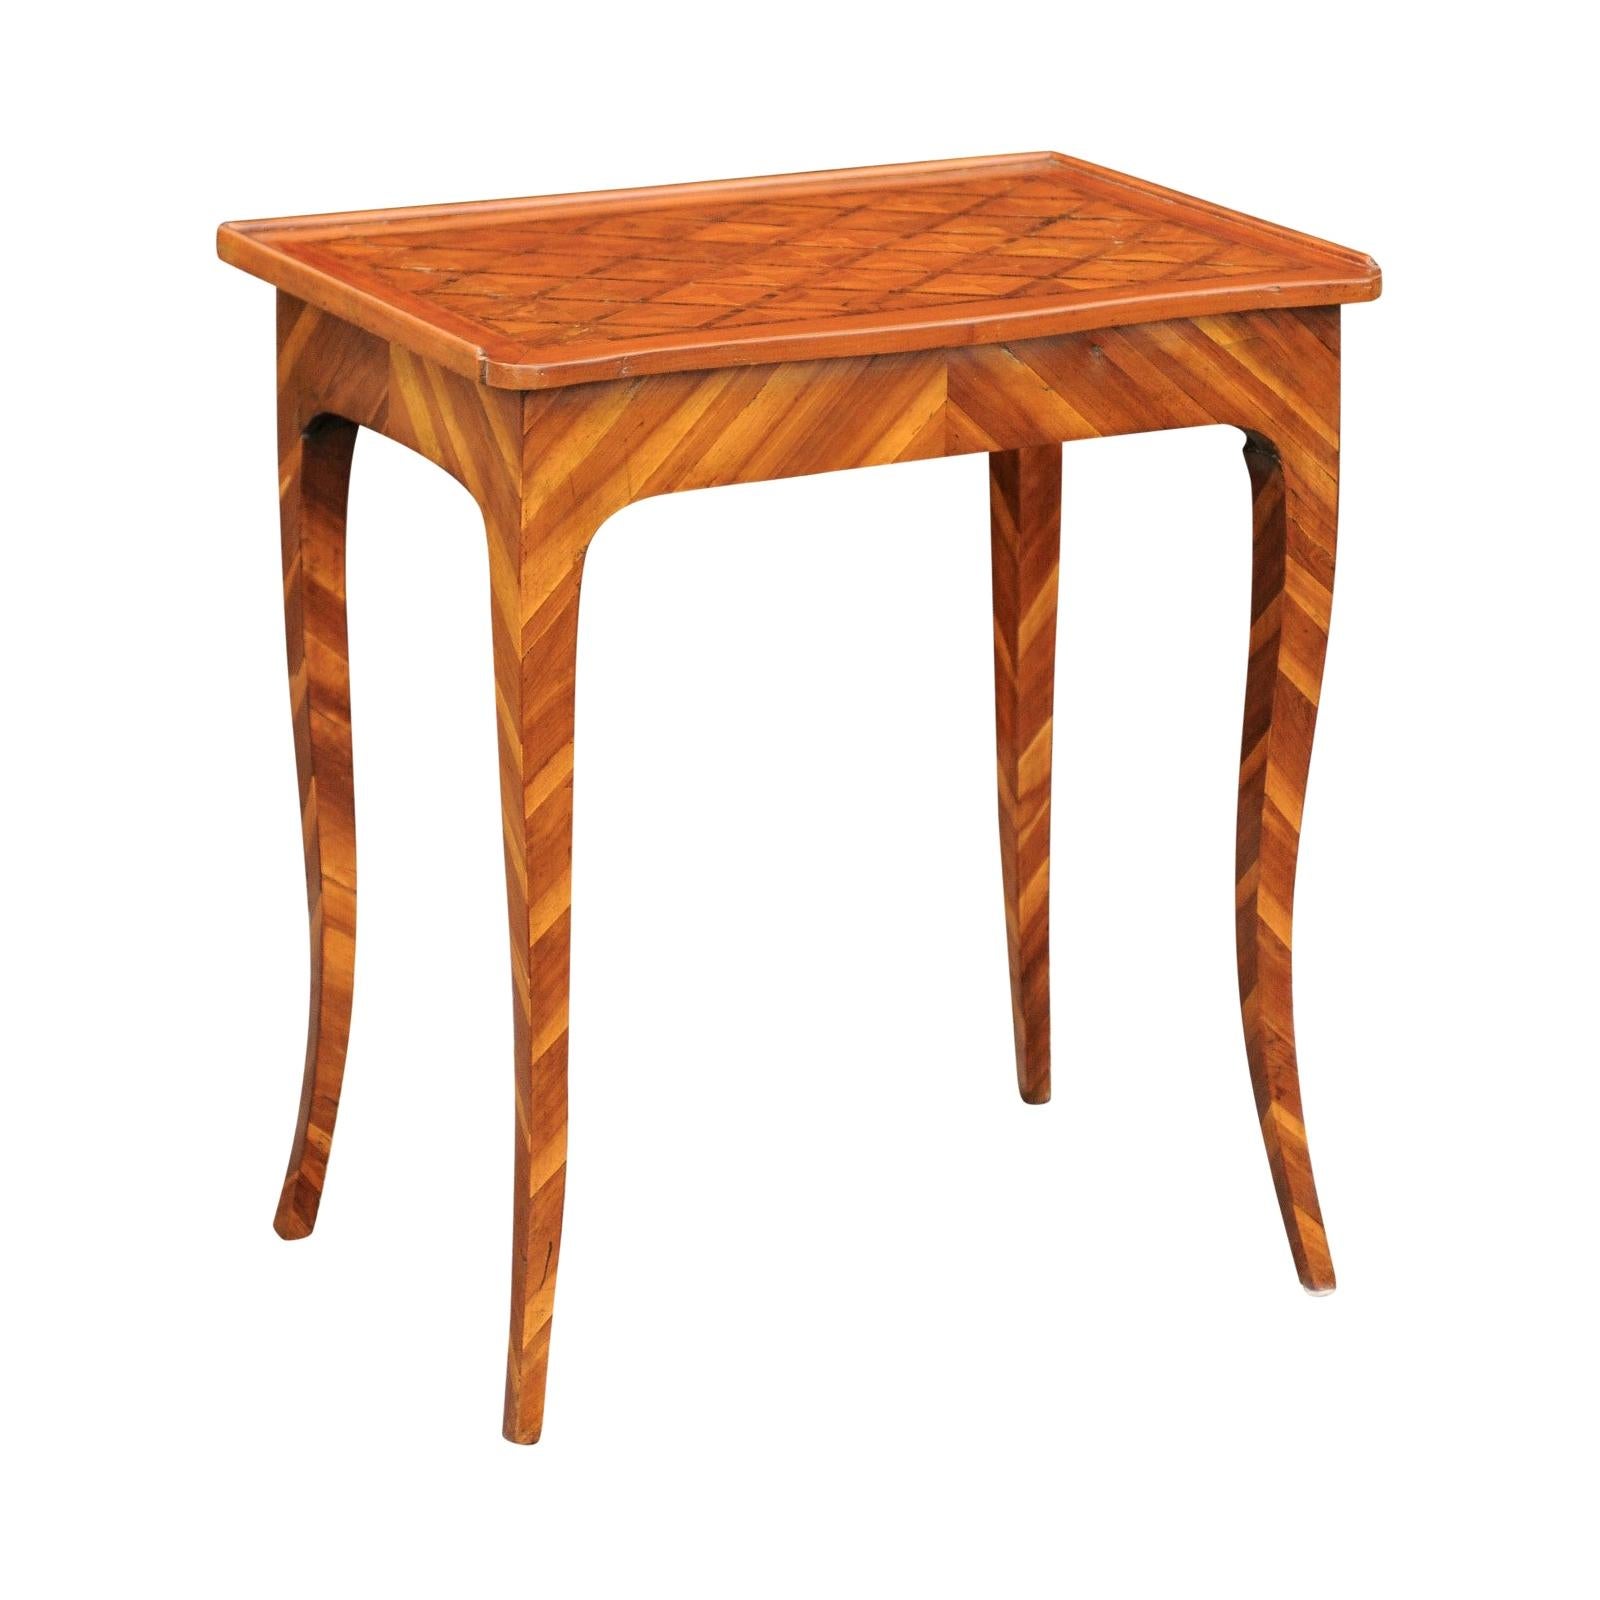 Italian 1820s Walnut Side Table with Marquetry Top, Inlaid Legs and Side Drawer For Sale